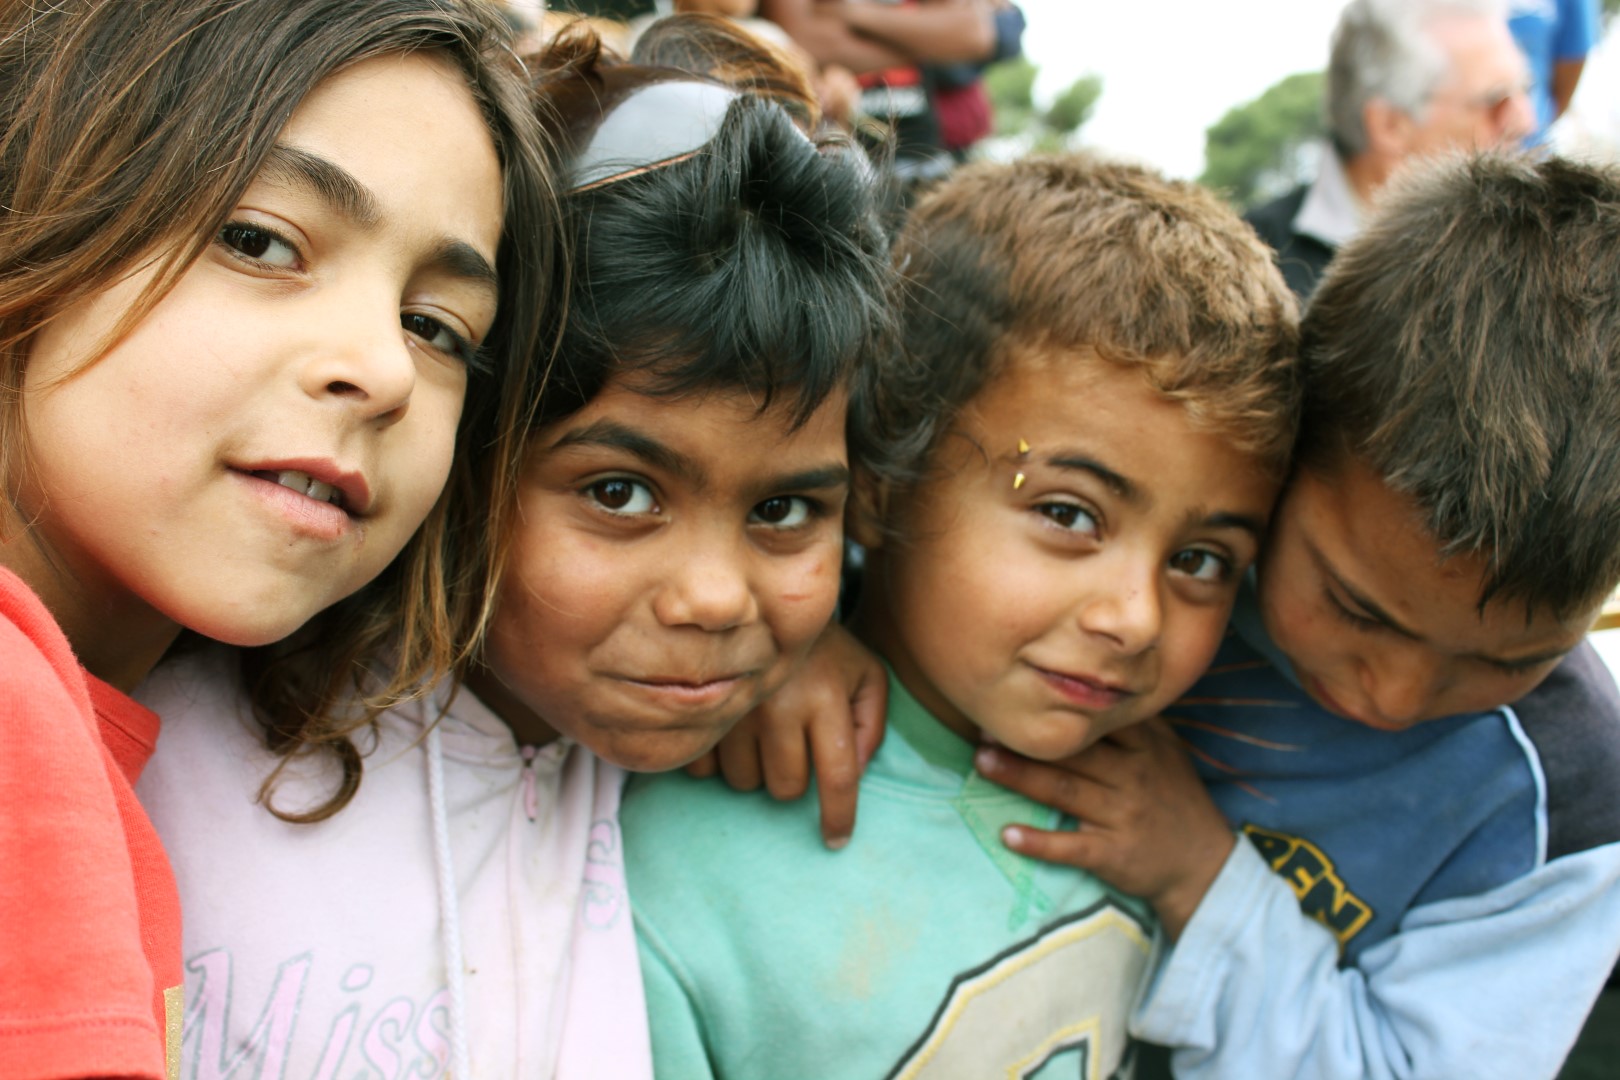 Roma children of Athens, Greece, photographed during the photographer's visit to Spata area.